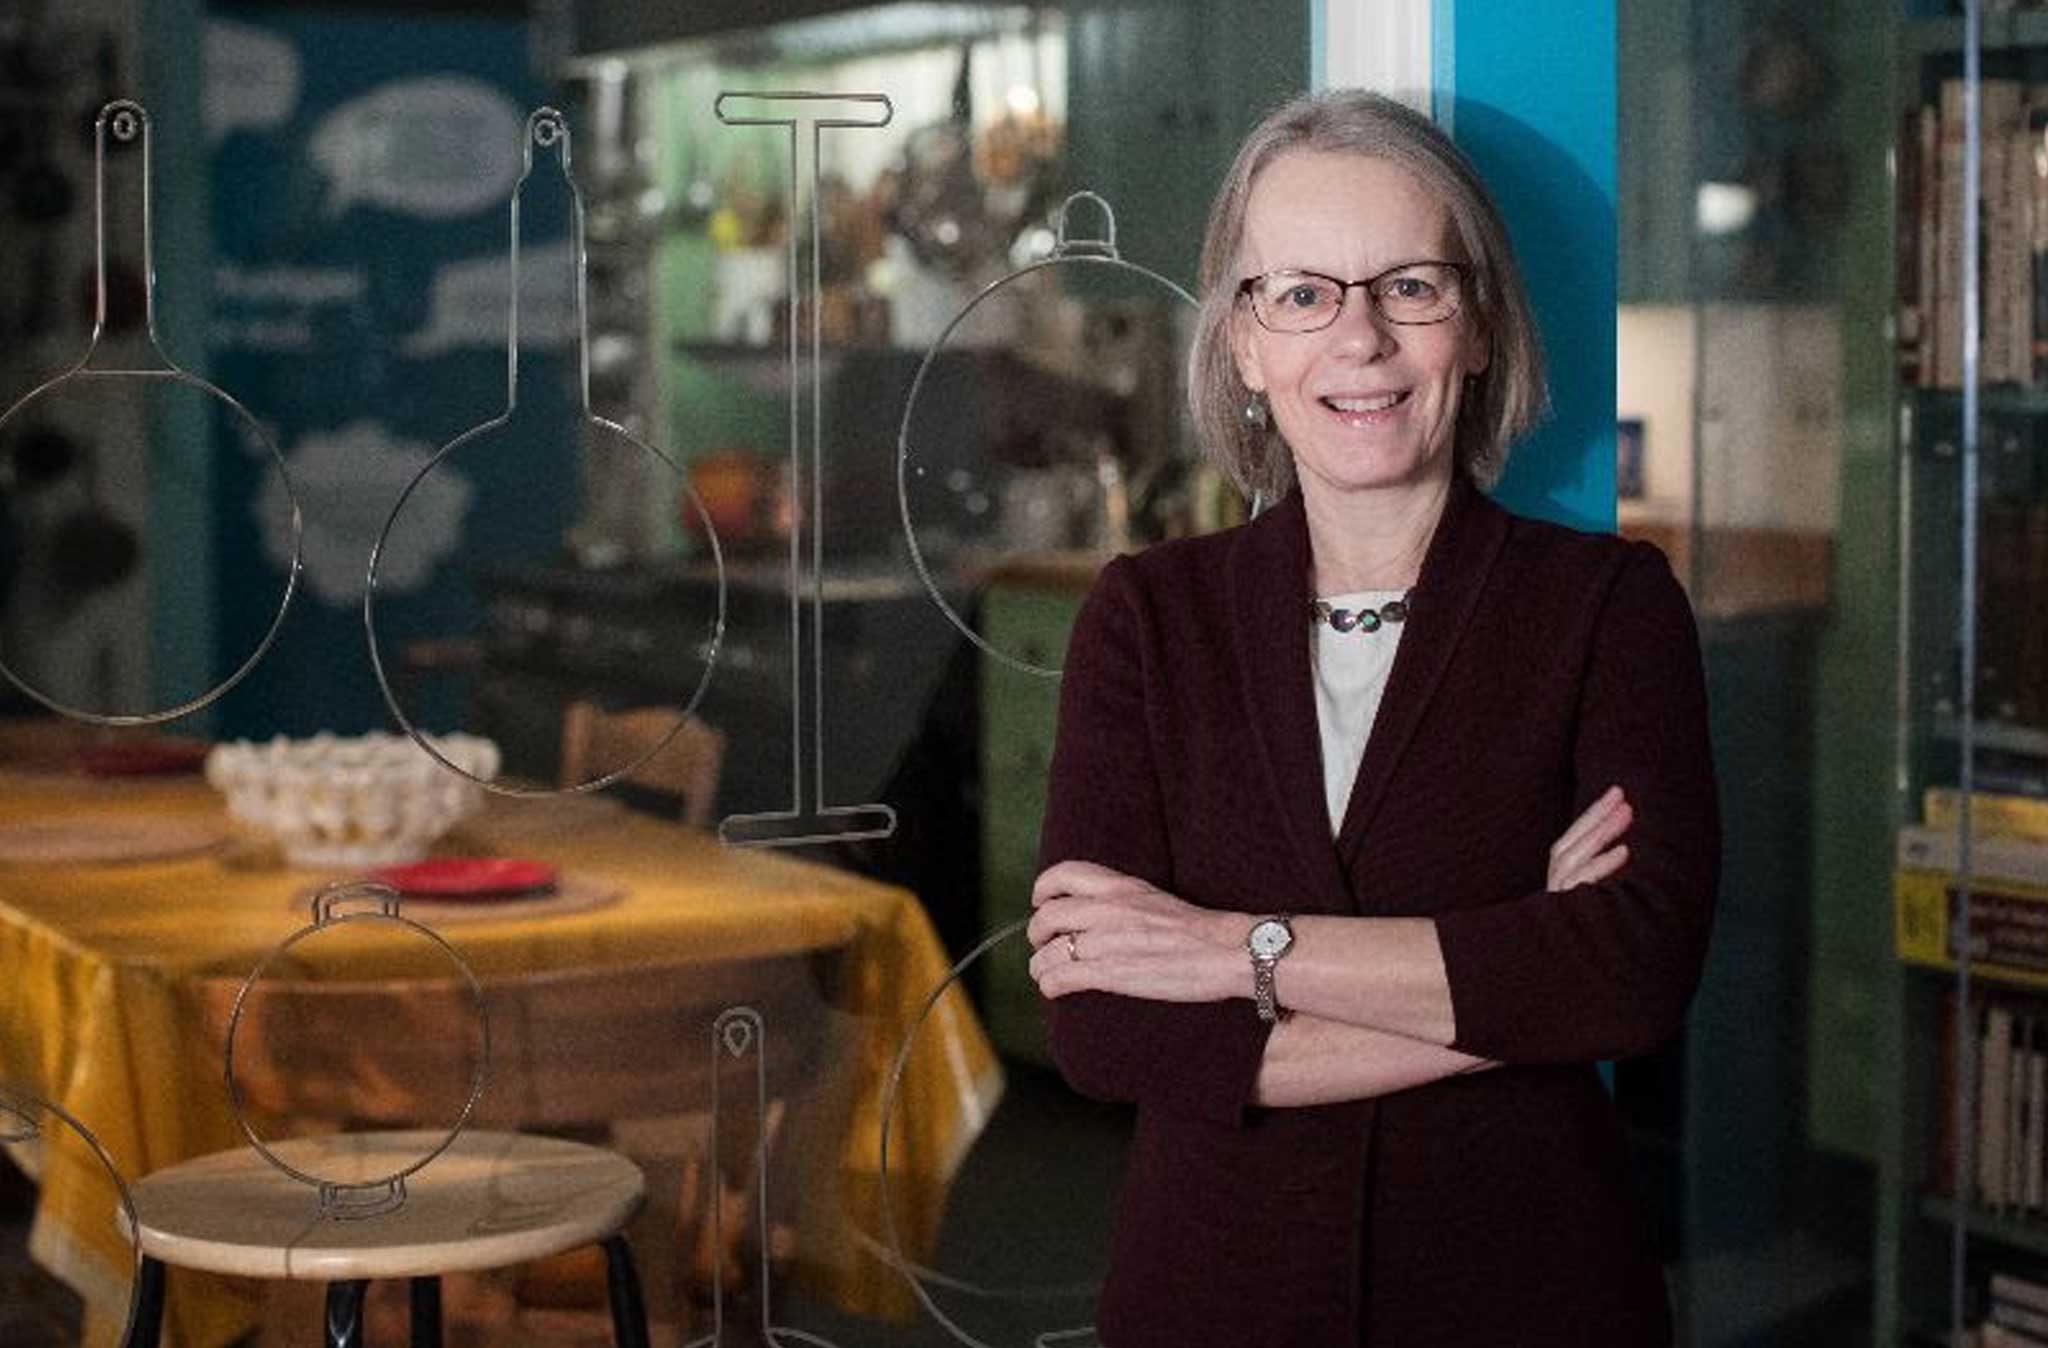 Paula Johnson, Food History Curator at the Smithsonian's National Museum of American History